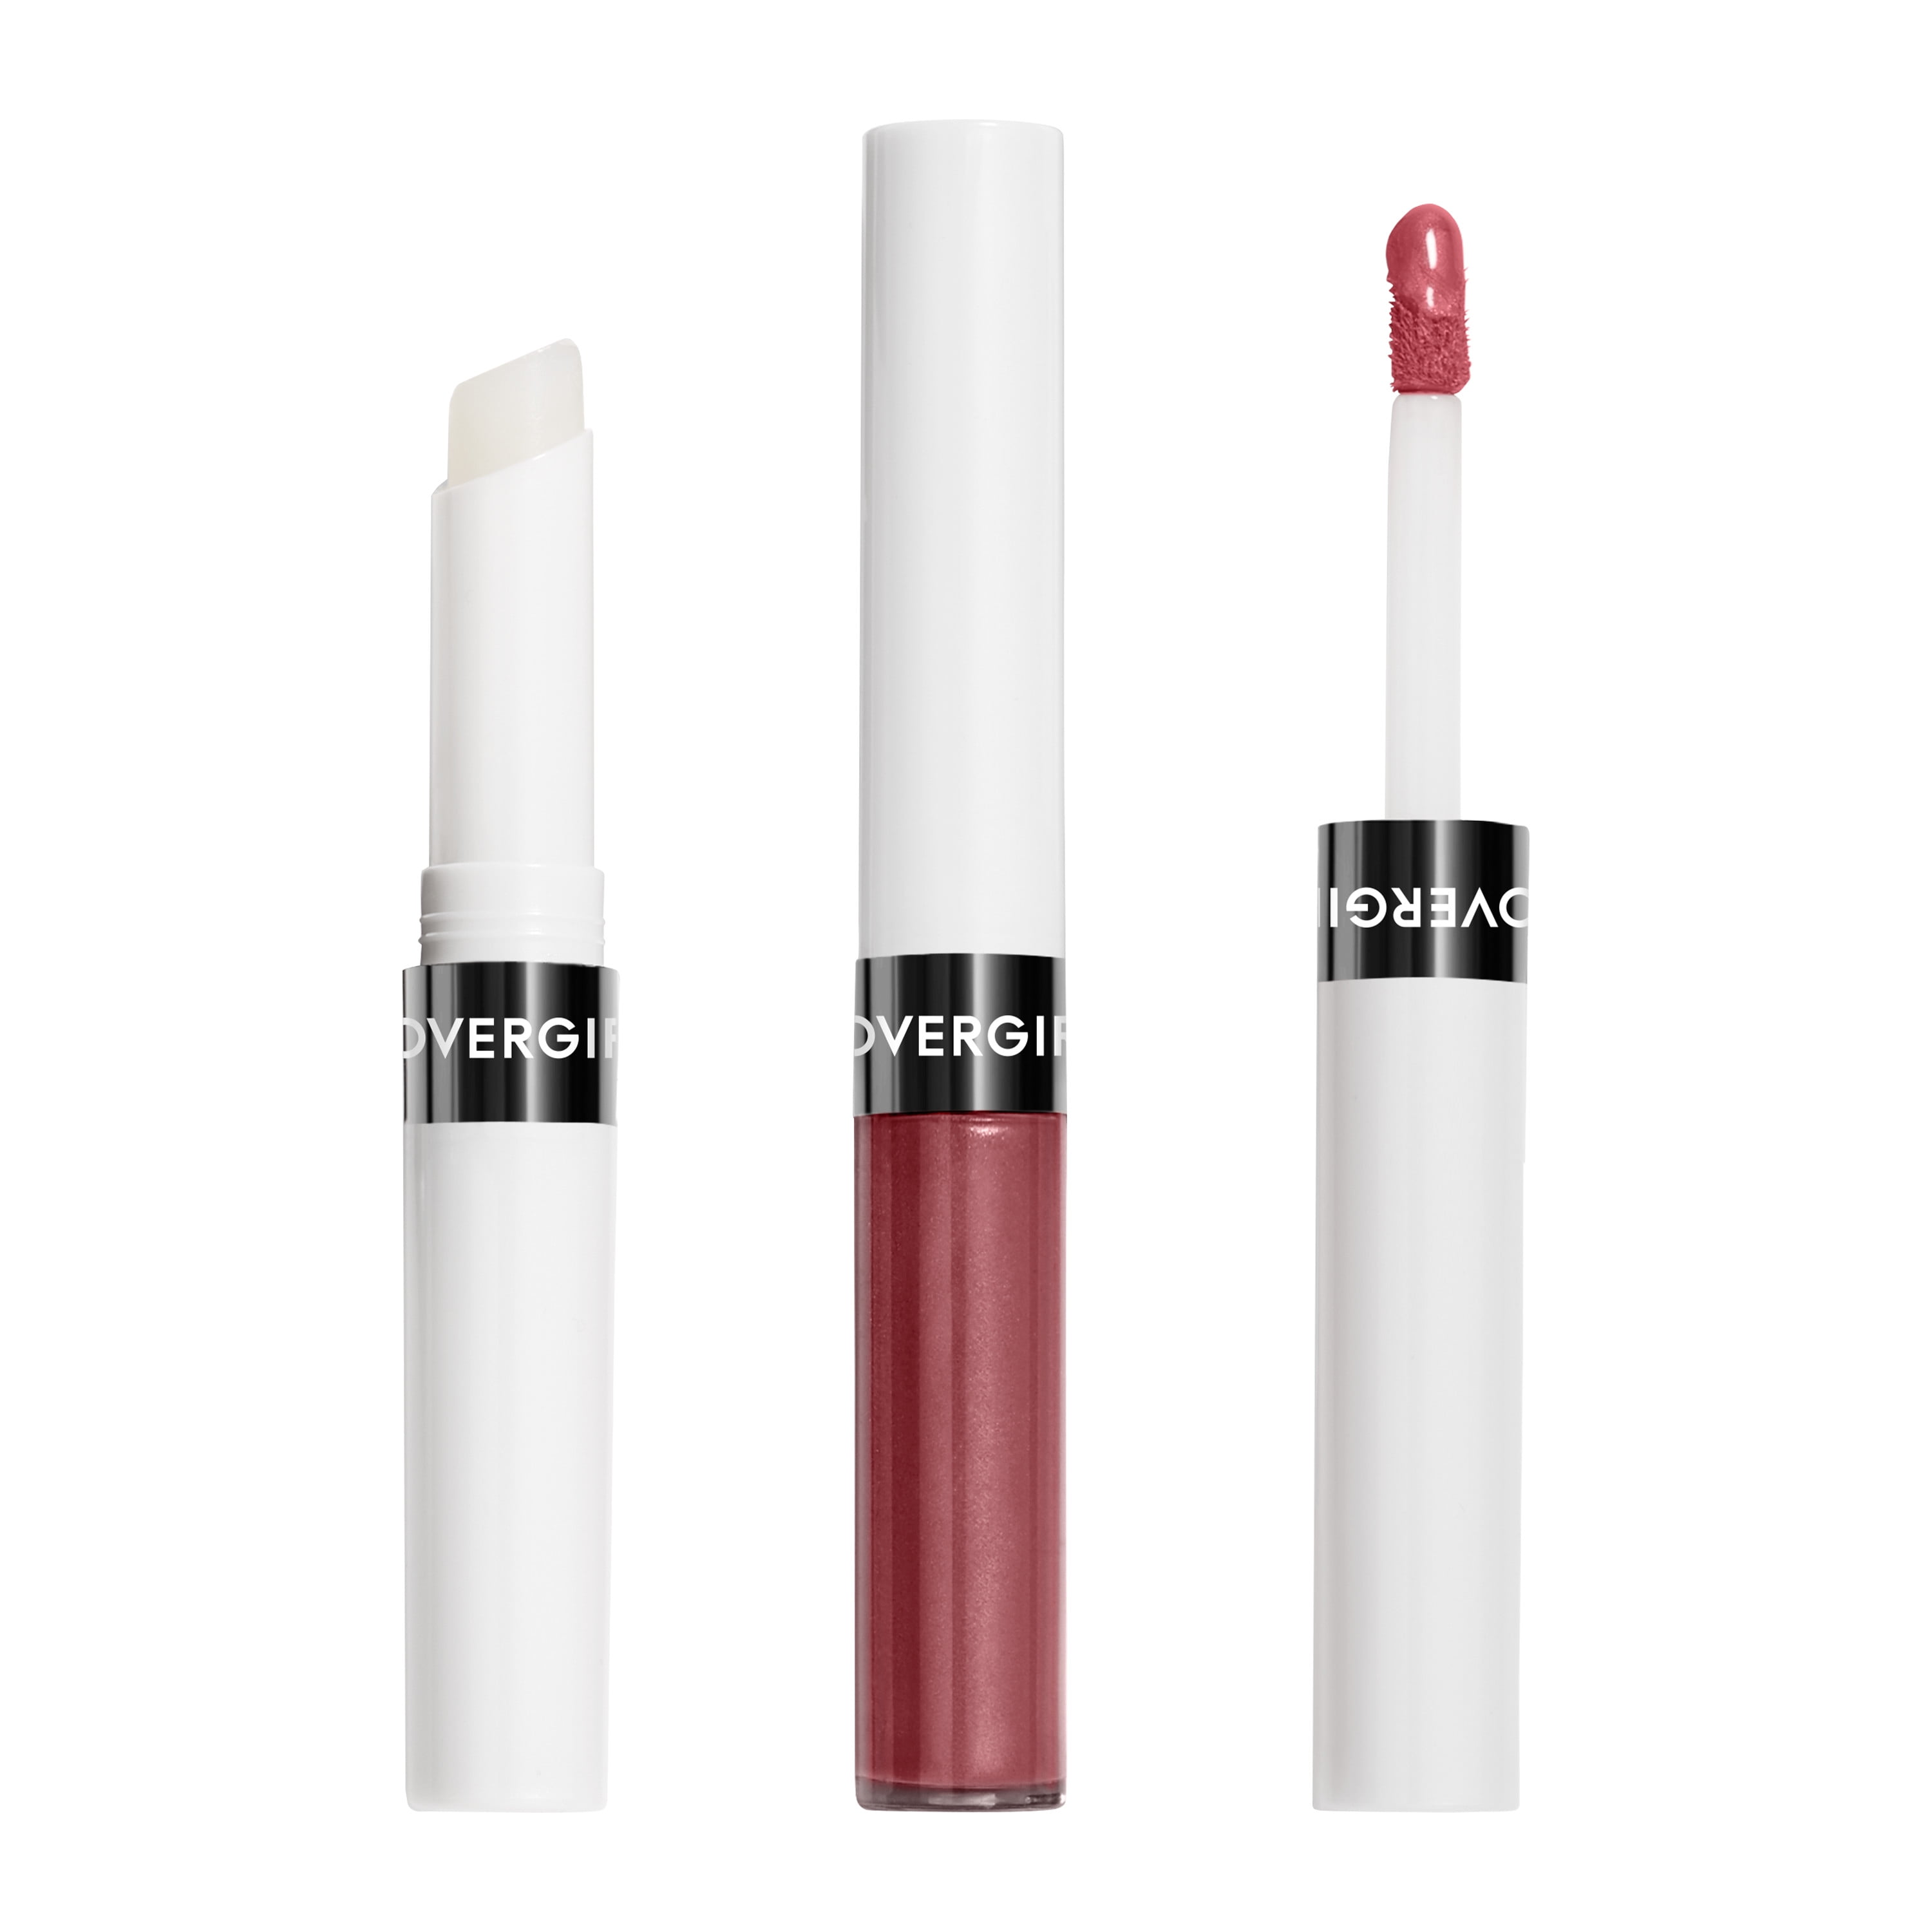 COVERGIRL Outlast All-Day Lip Color Liquid Lipstick and Moisturizing Topcoat, Longwear, Good Mauve, Stays On All Day, Moisturizing Formula, Cruelty Free, Easy Two-Step Process